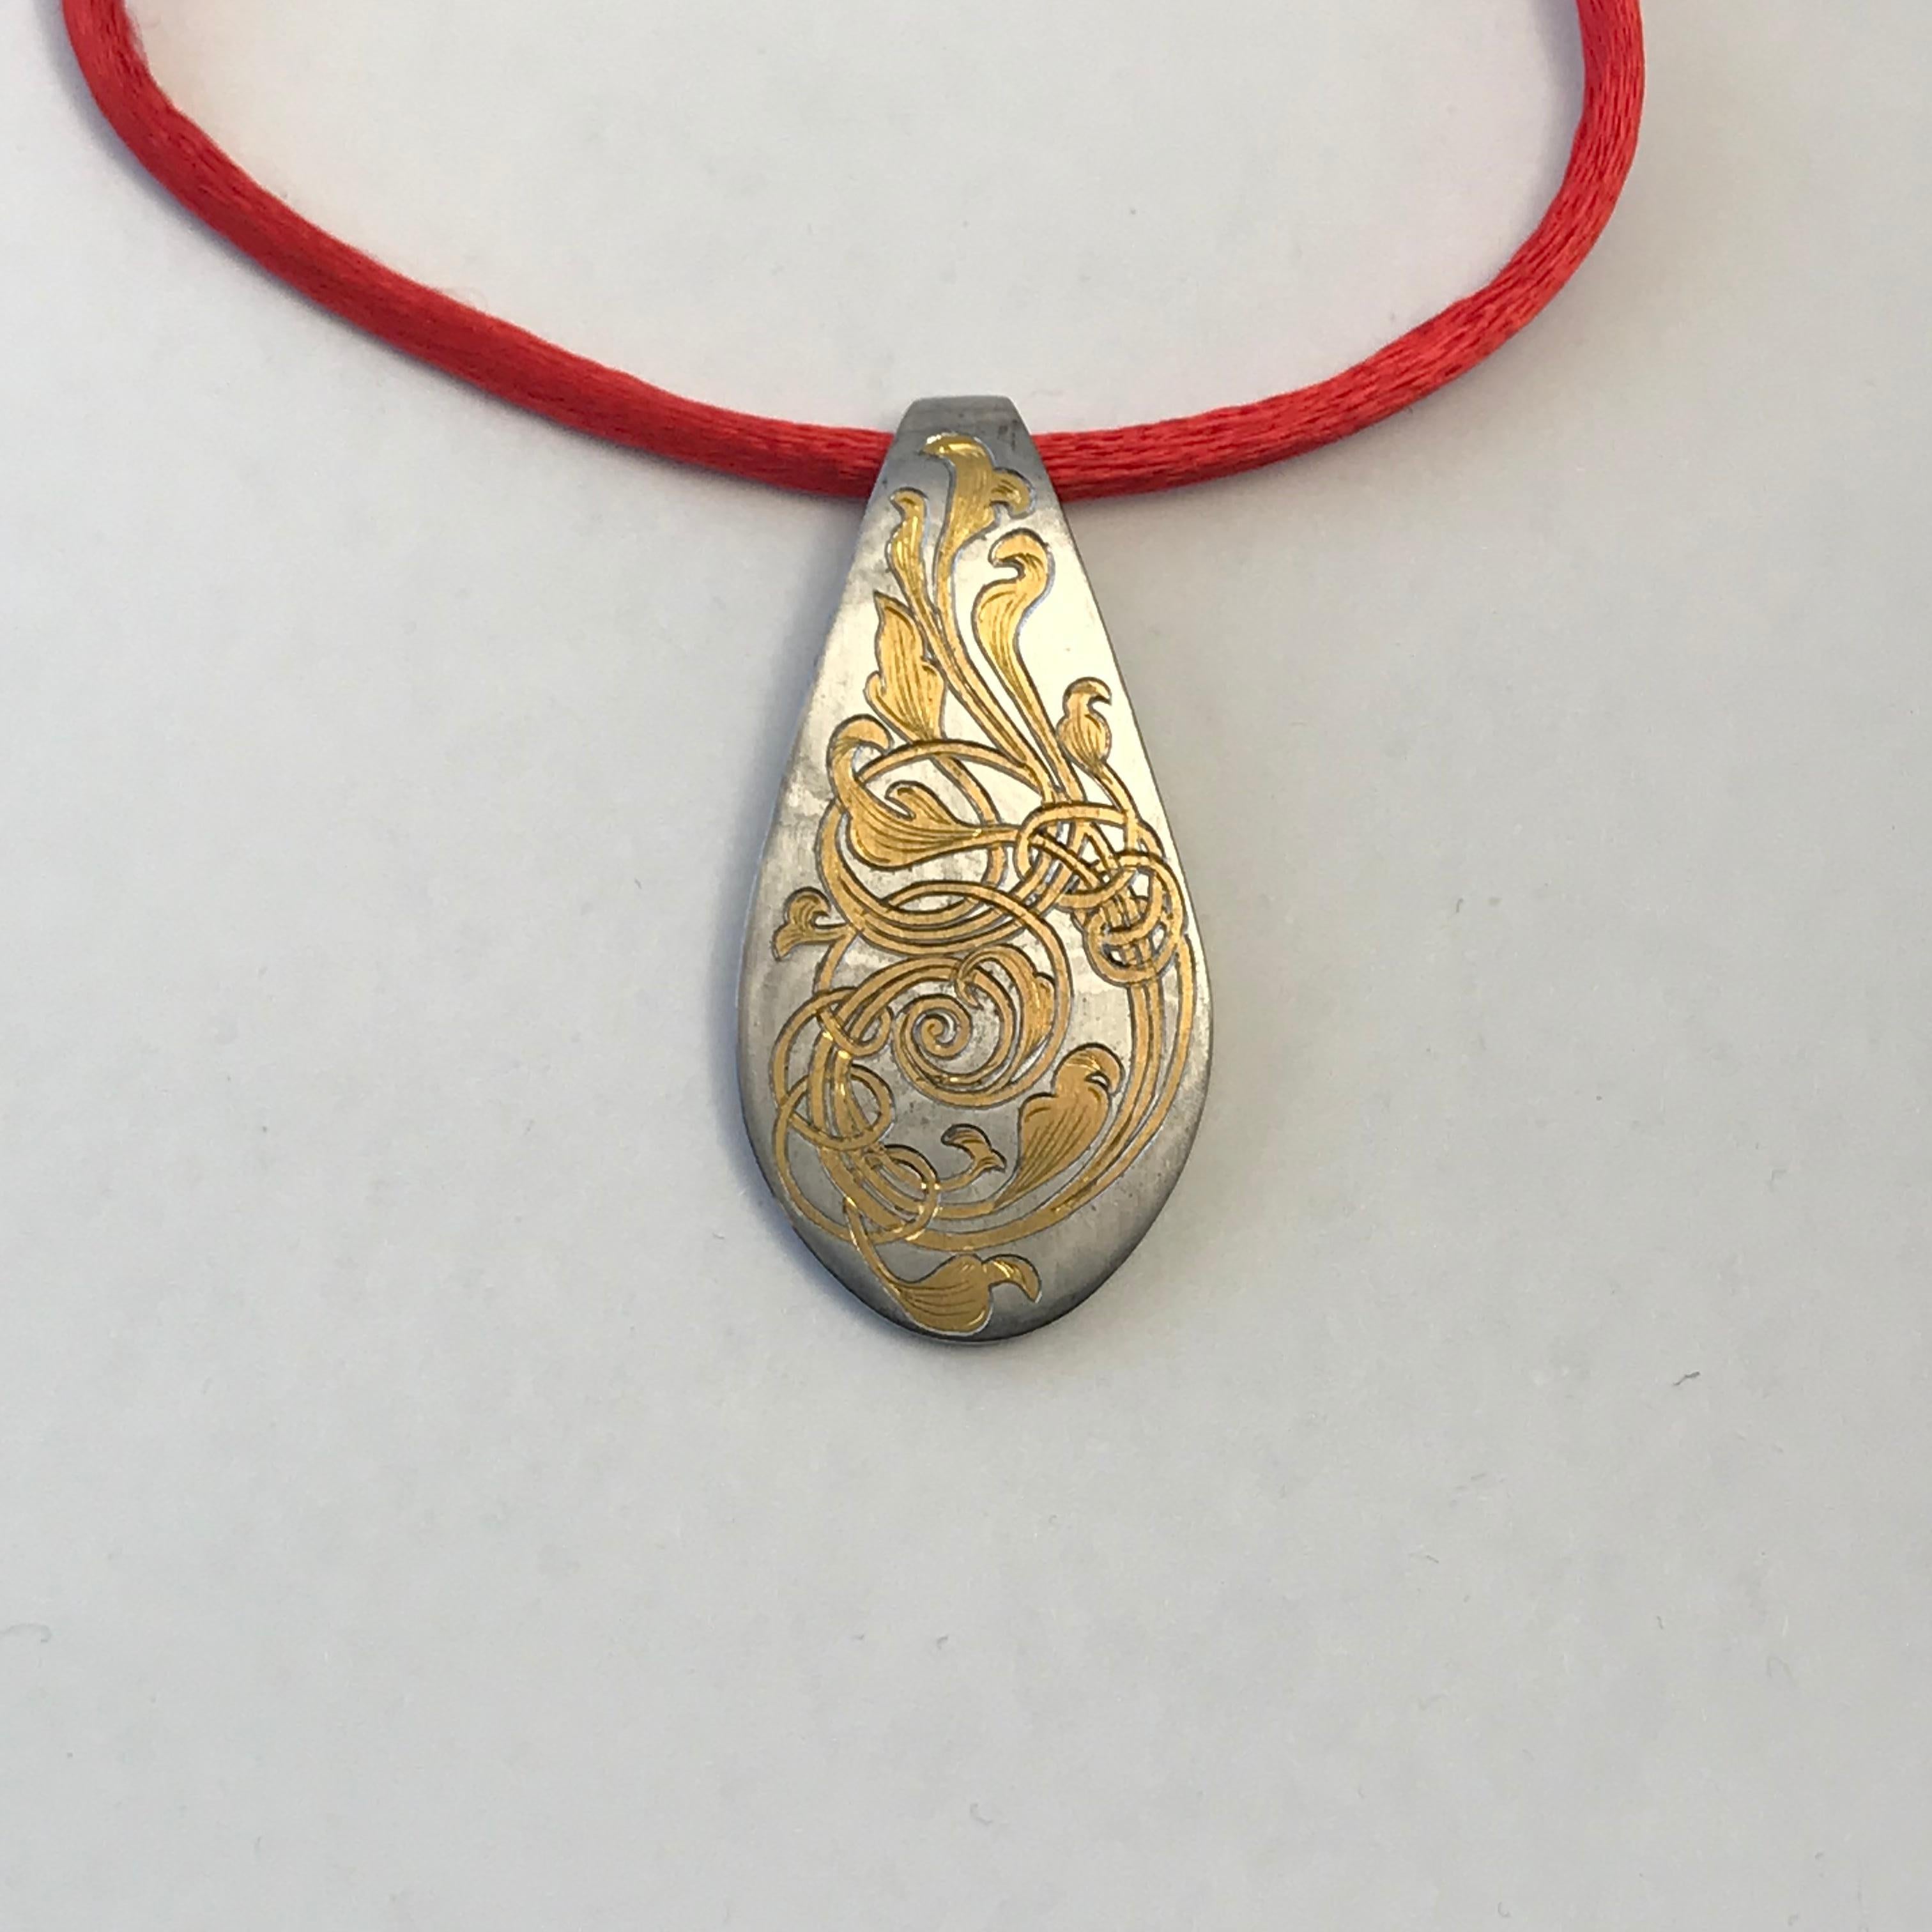 Damascus Steel & 24K Gold Pendant
This is a beautiful pendant made of Damascus Steel with 24 karat gold inlays. This is difficult to do because I have to cut out the pattern into the steel then hammer a sheet of 24k gold into the shape then engrave